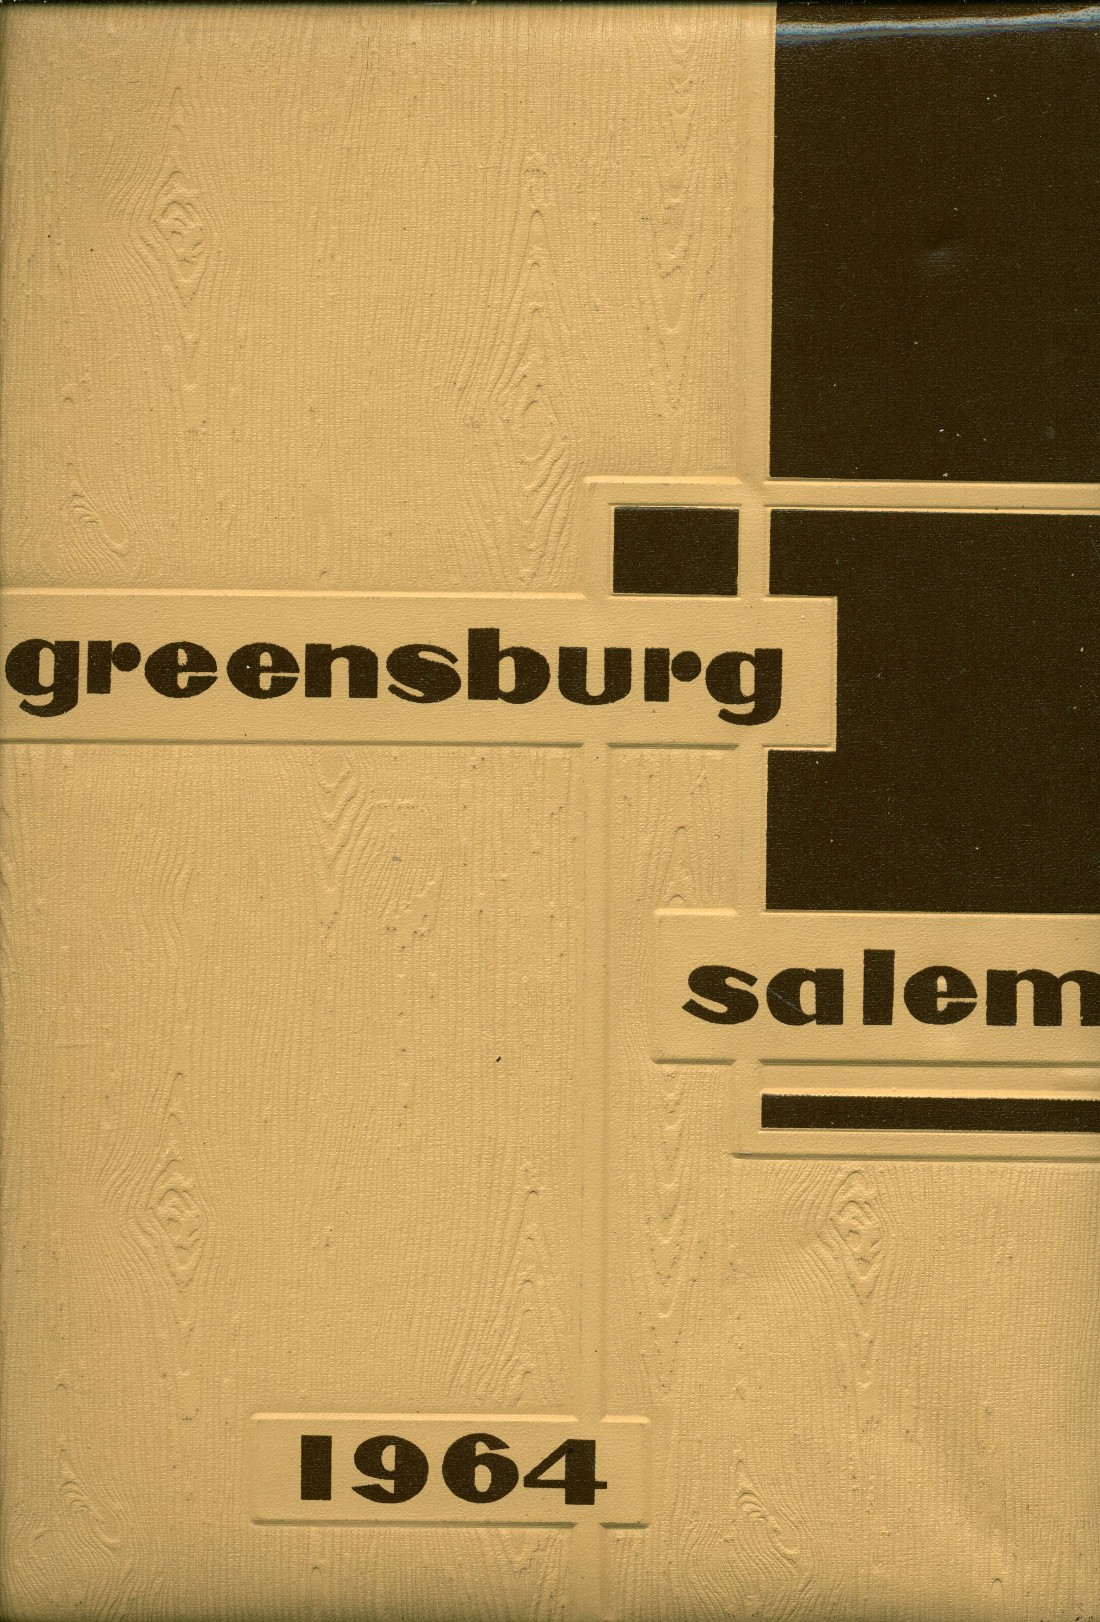 1964-yearbook-from-greensburg-salem-high-school-from-greensburg